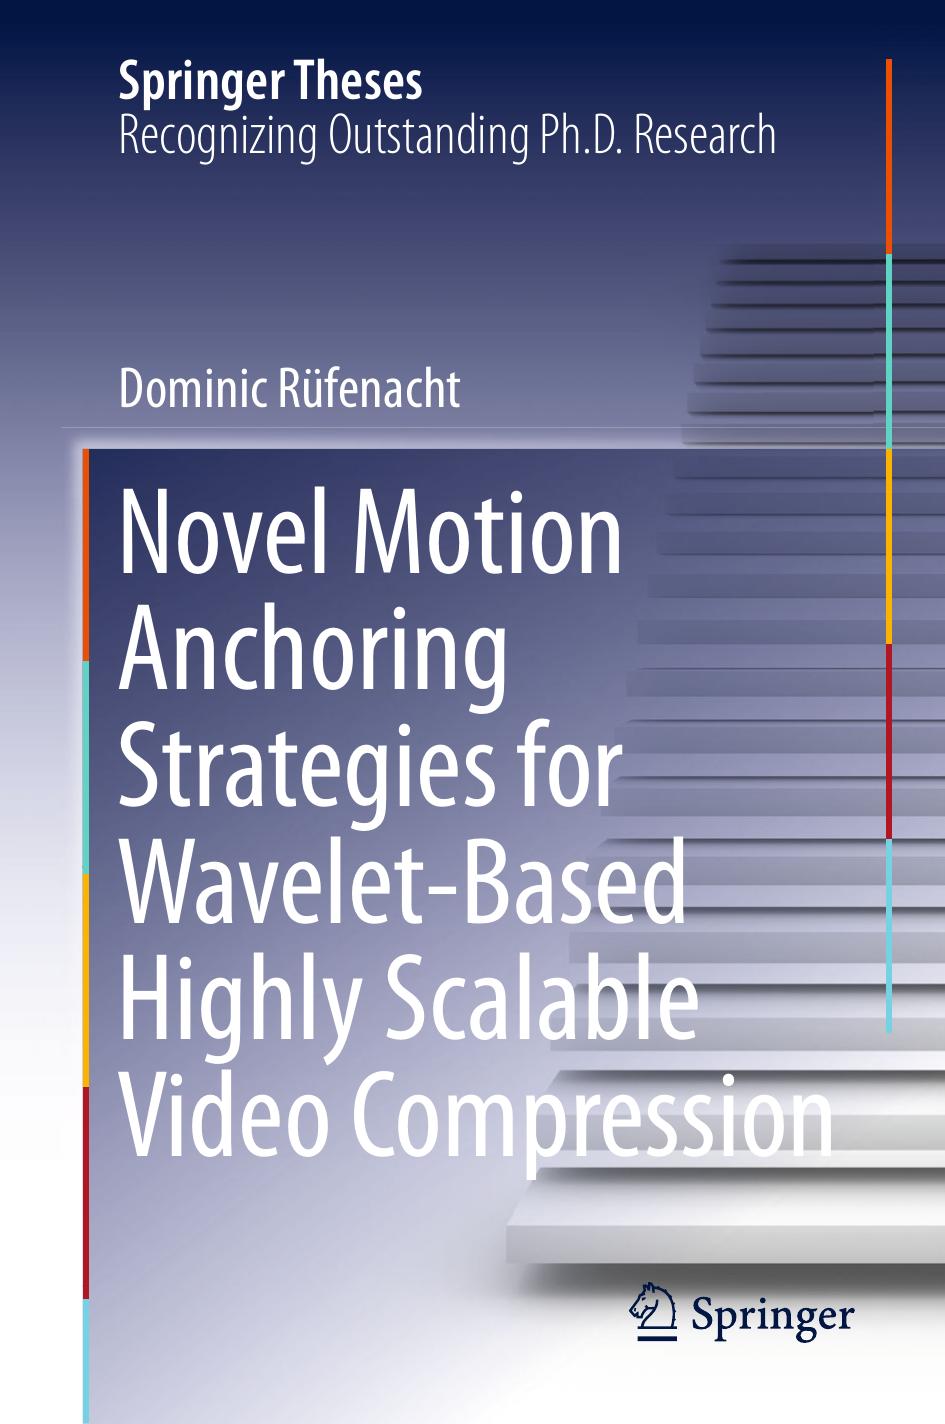 Novel Motion Anchoring Strategies for Wavelet-based Highly Scalable Video Compression by Dominic Rüfenacht